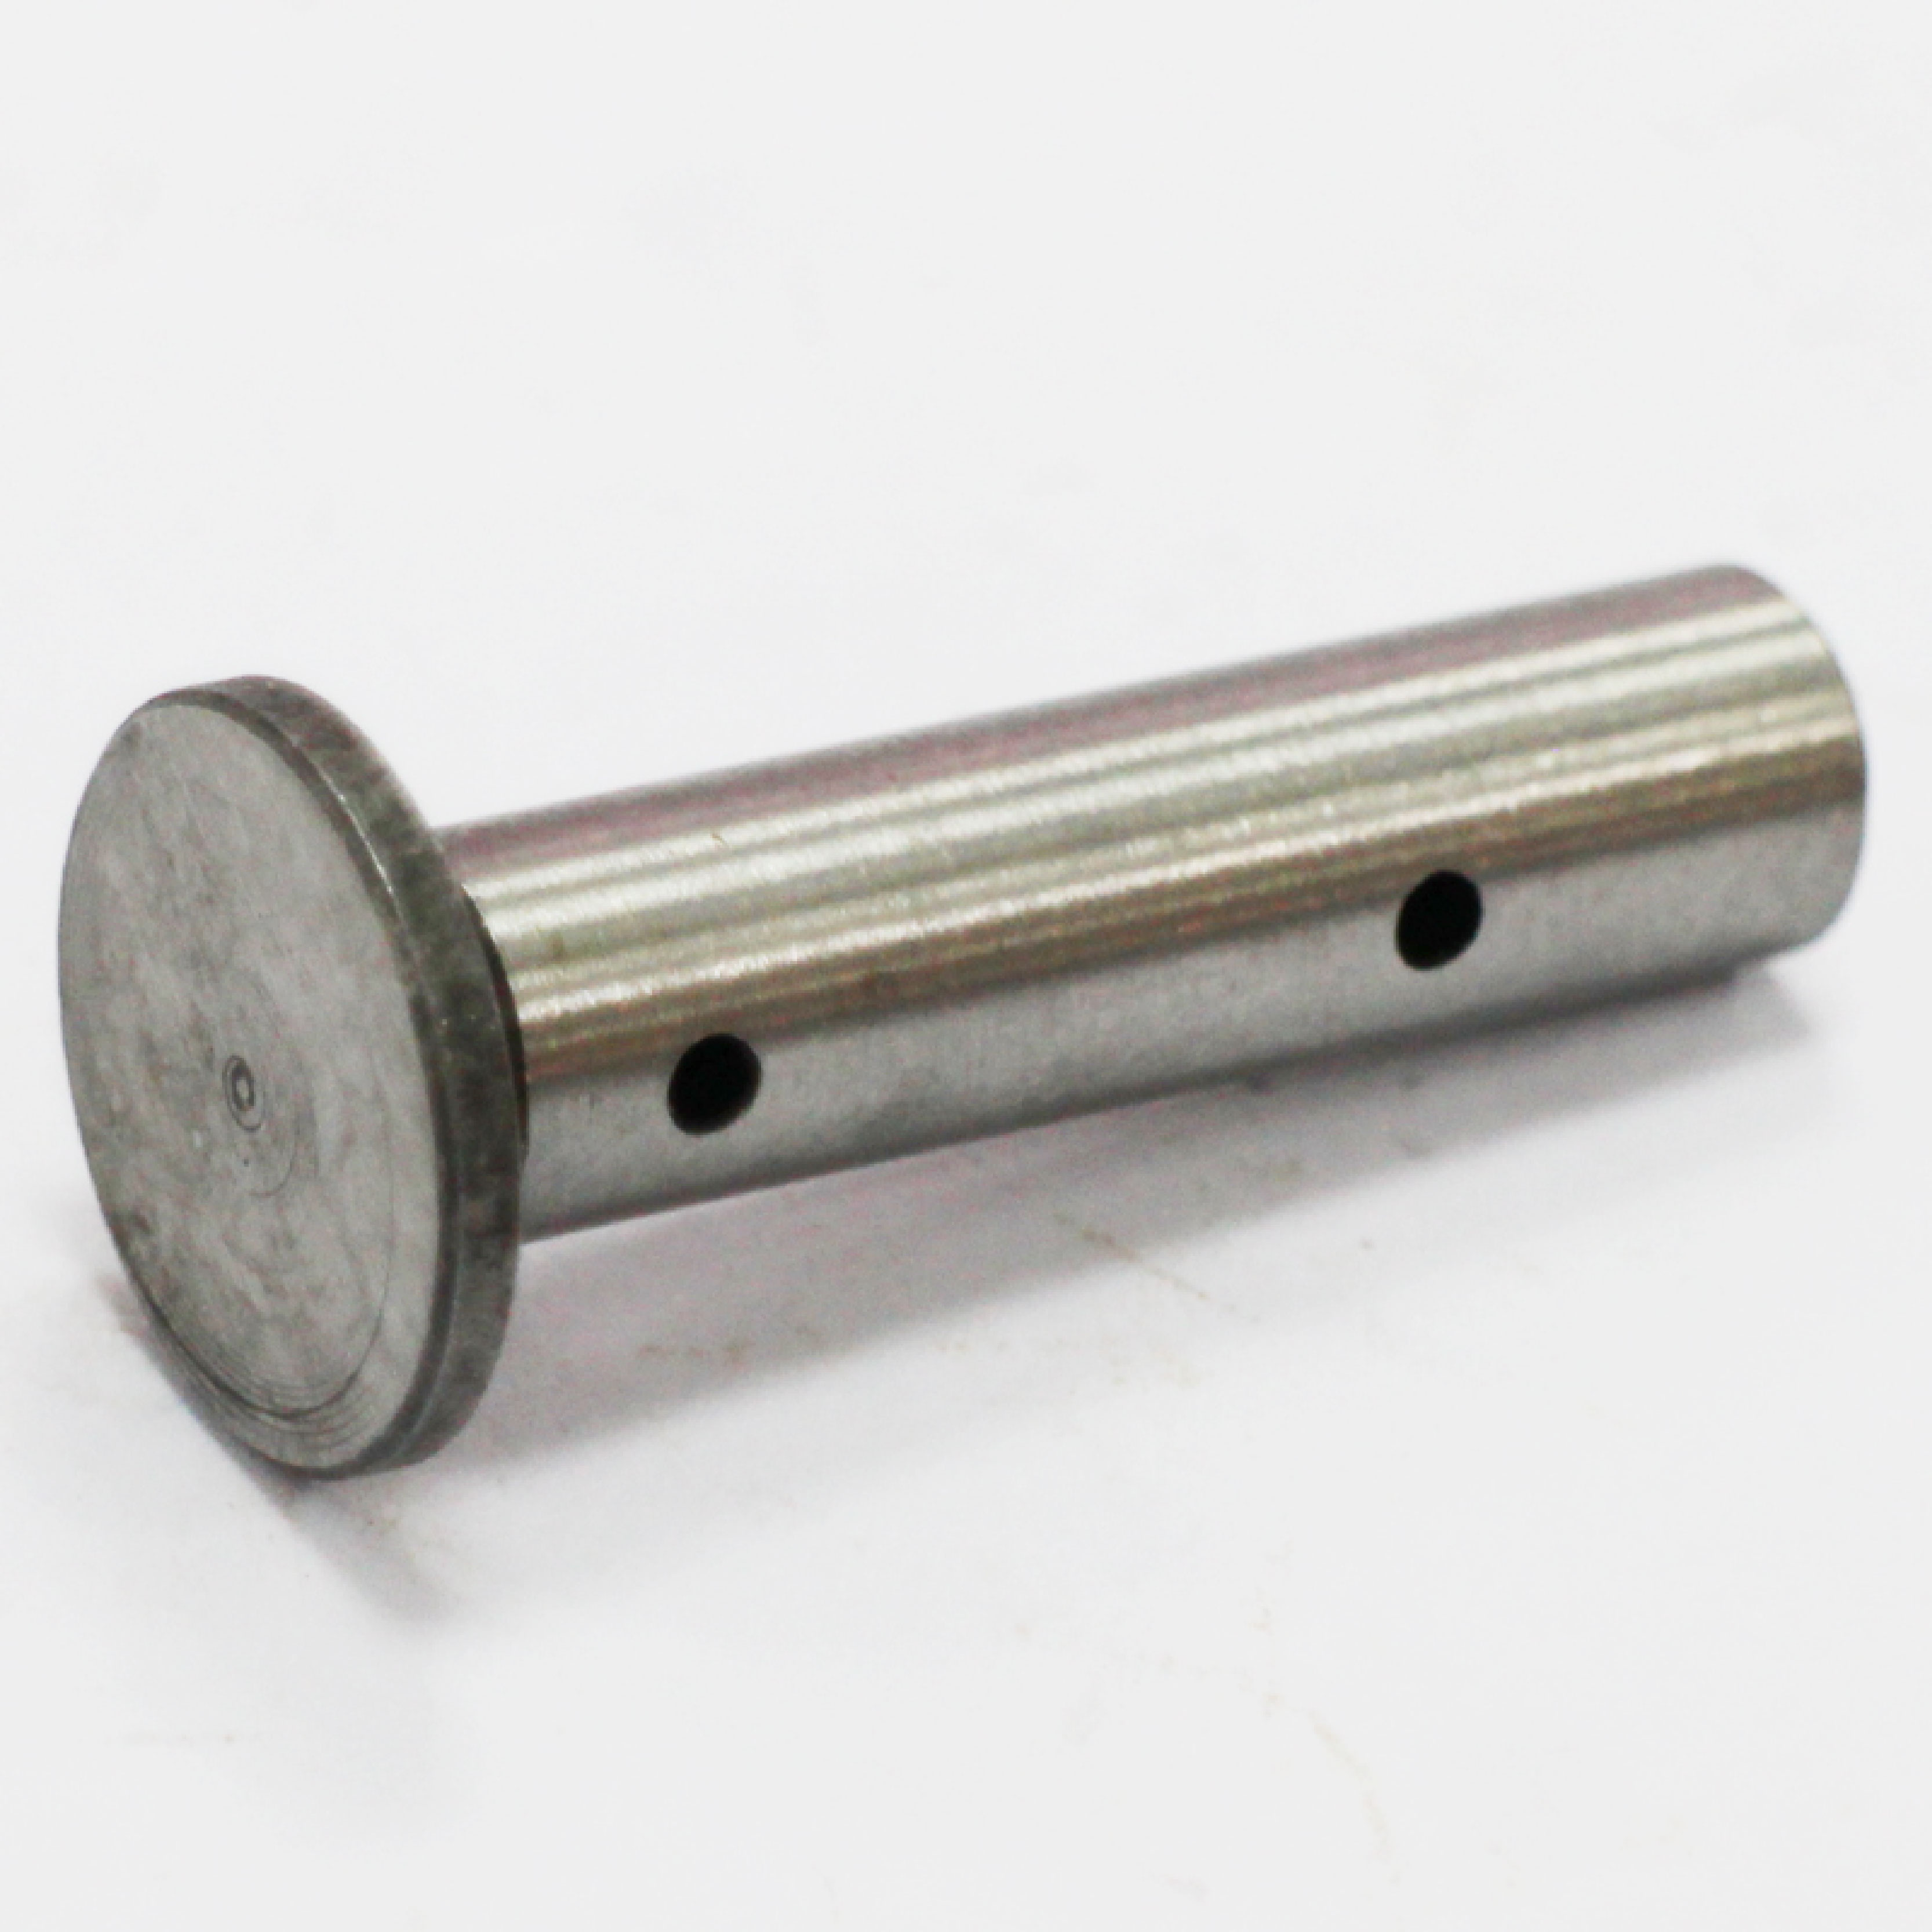 CONNECTING ROD PIN